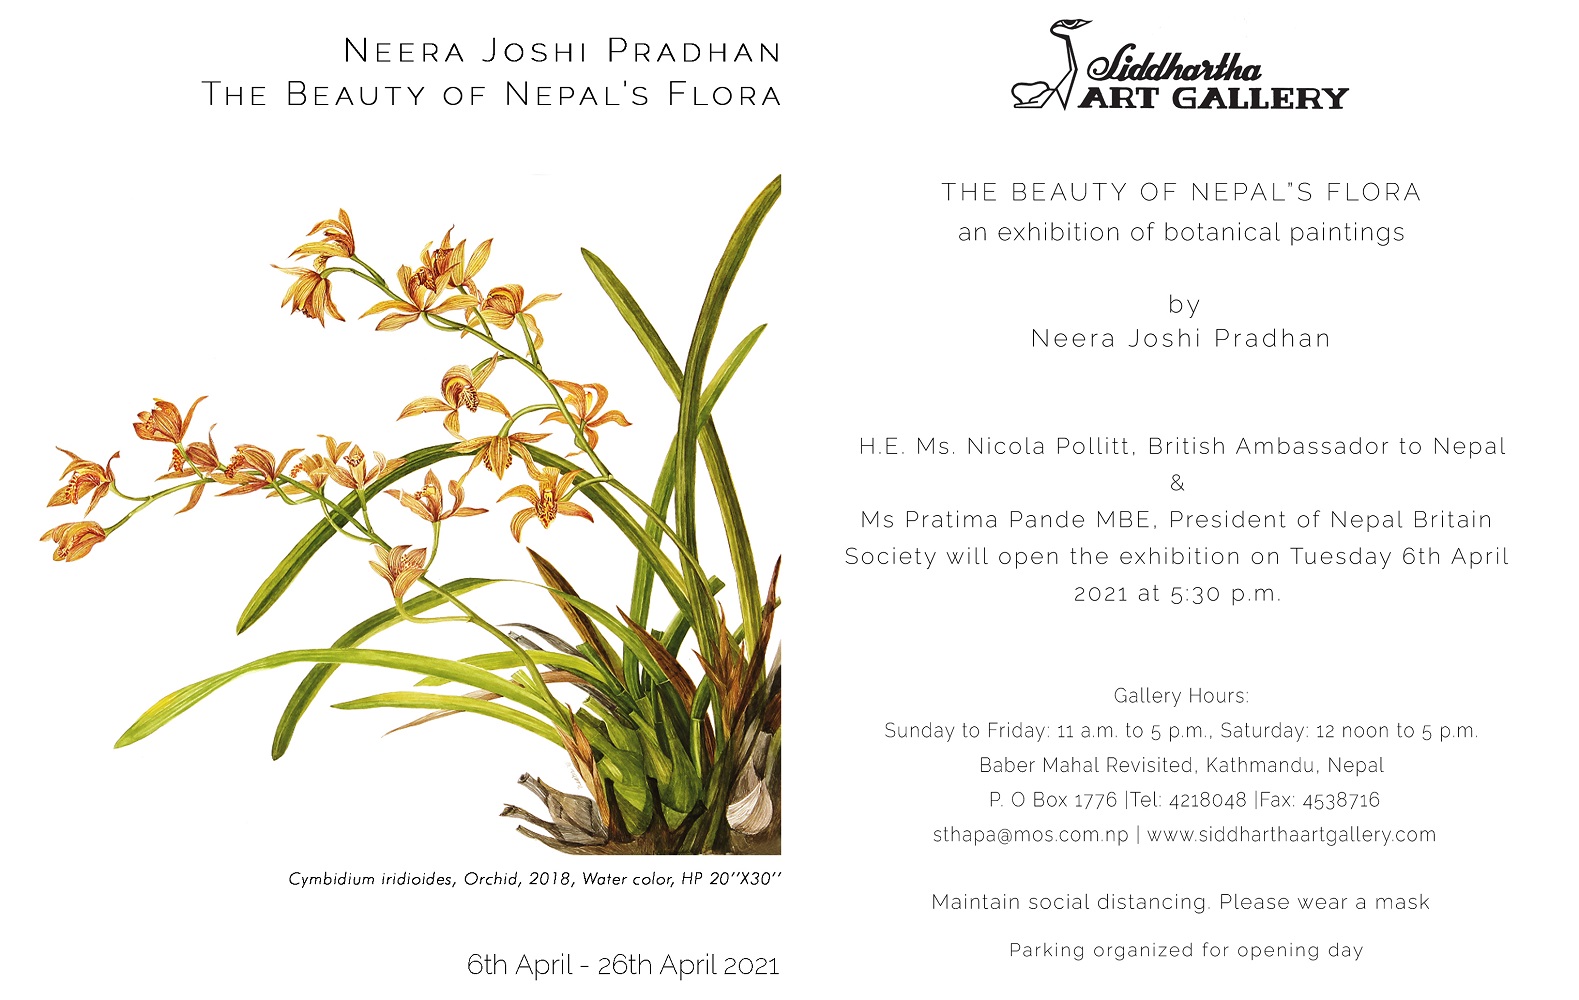 "The Beauty of Nepal's Flora", Siddhartha Art Gallery Baber Mahal Revisited, Nepal .